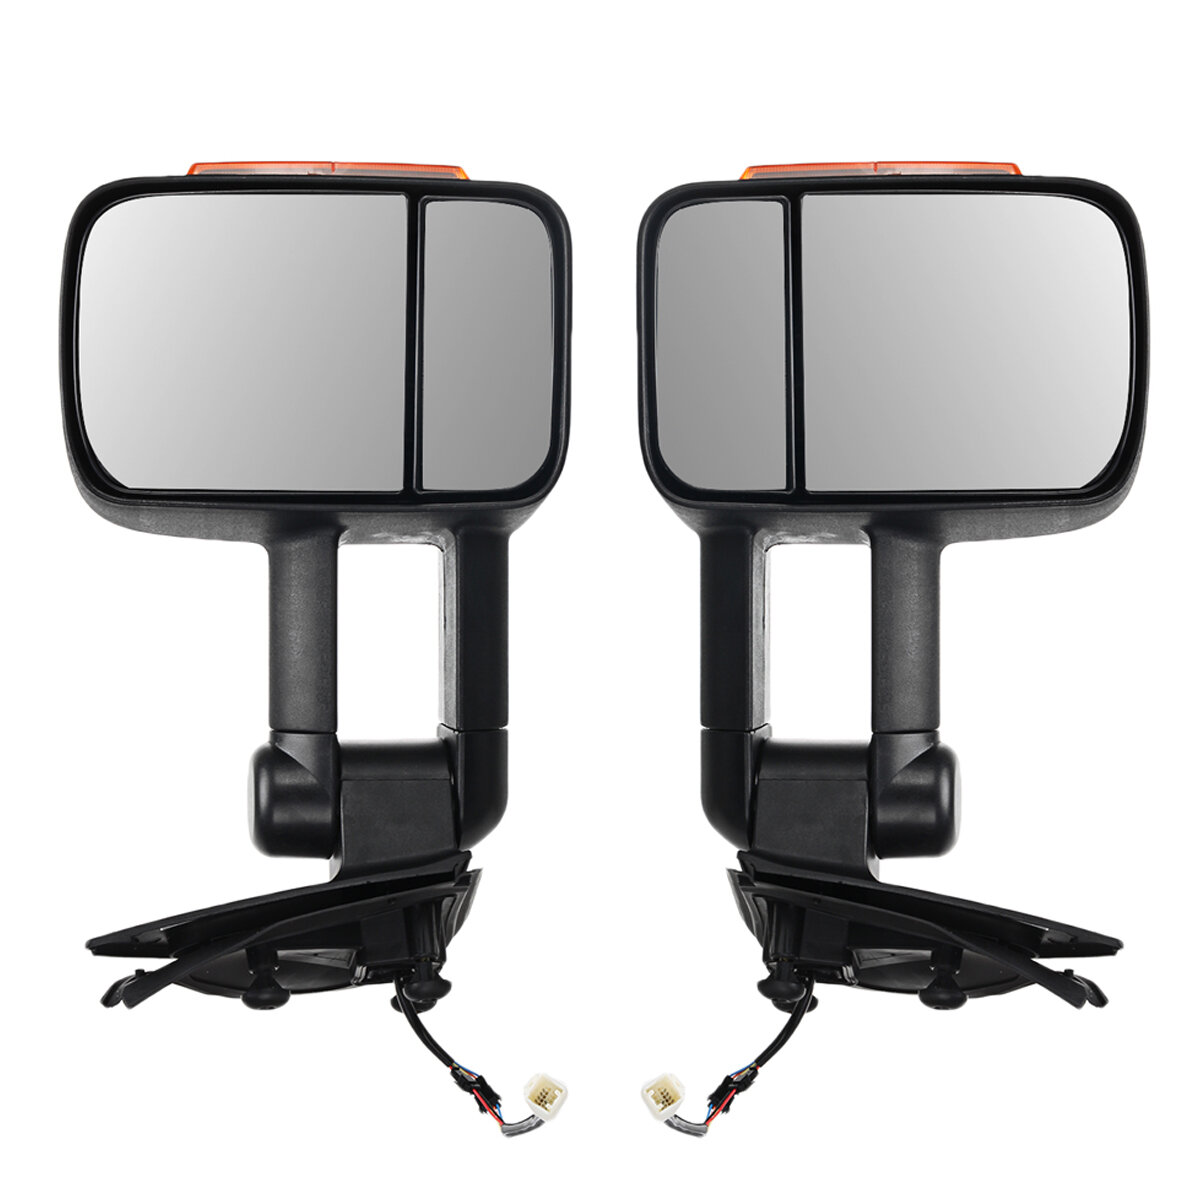 Image of 2X Extendable Towing Mirrors For Isuzu D-MAX MY 2012-2019 Ute/Cab Chassis Models